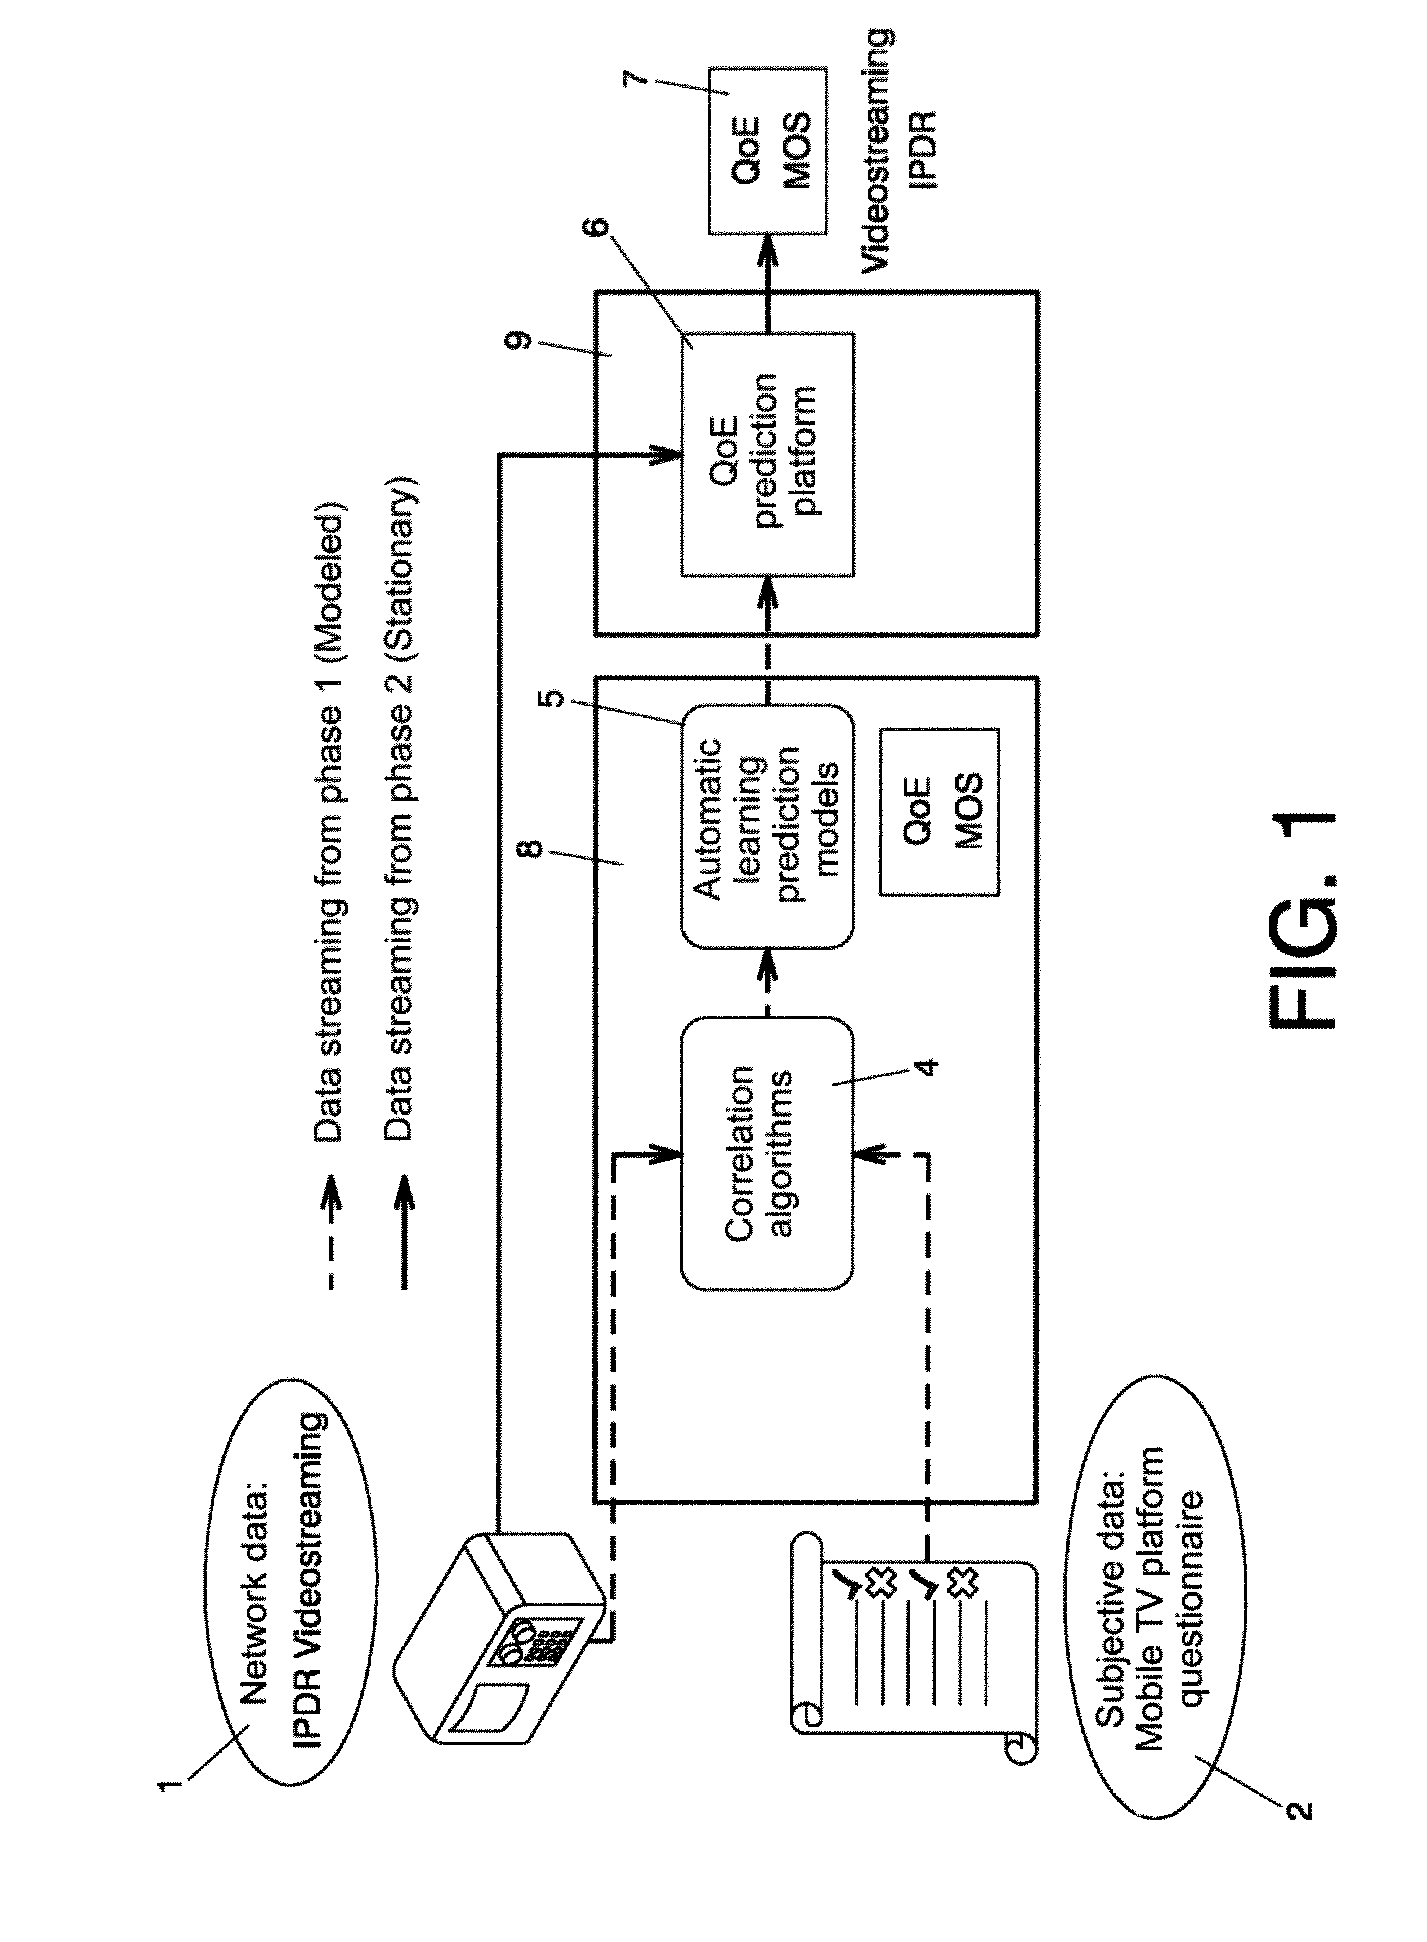 Method for calculating perception of the user experience of the quality of monitored integrated telecommunications operator services